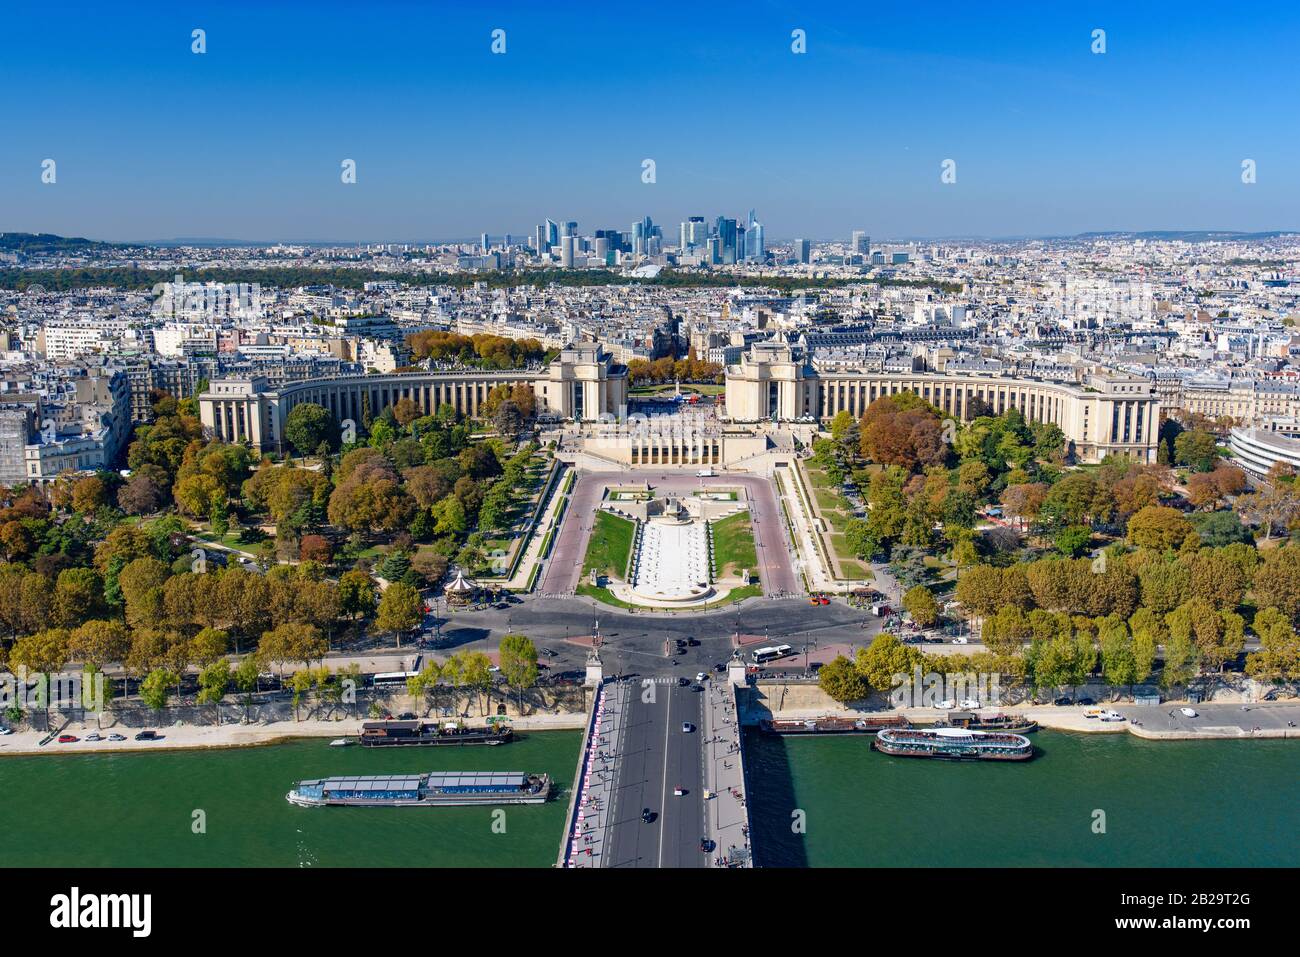 Aerial view of Palais de Chaillot, Seine river, and the skyline of Paris city from Eiffel Tower, Paris, France, Europe Stock Photo